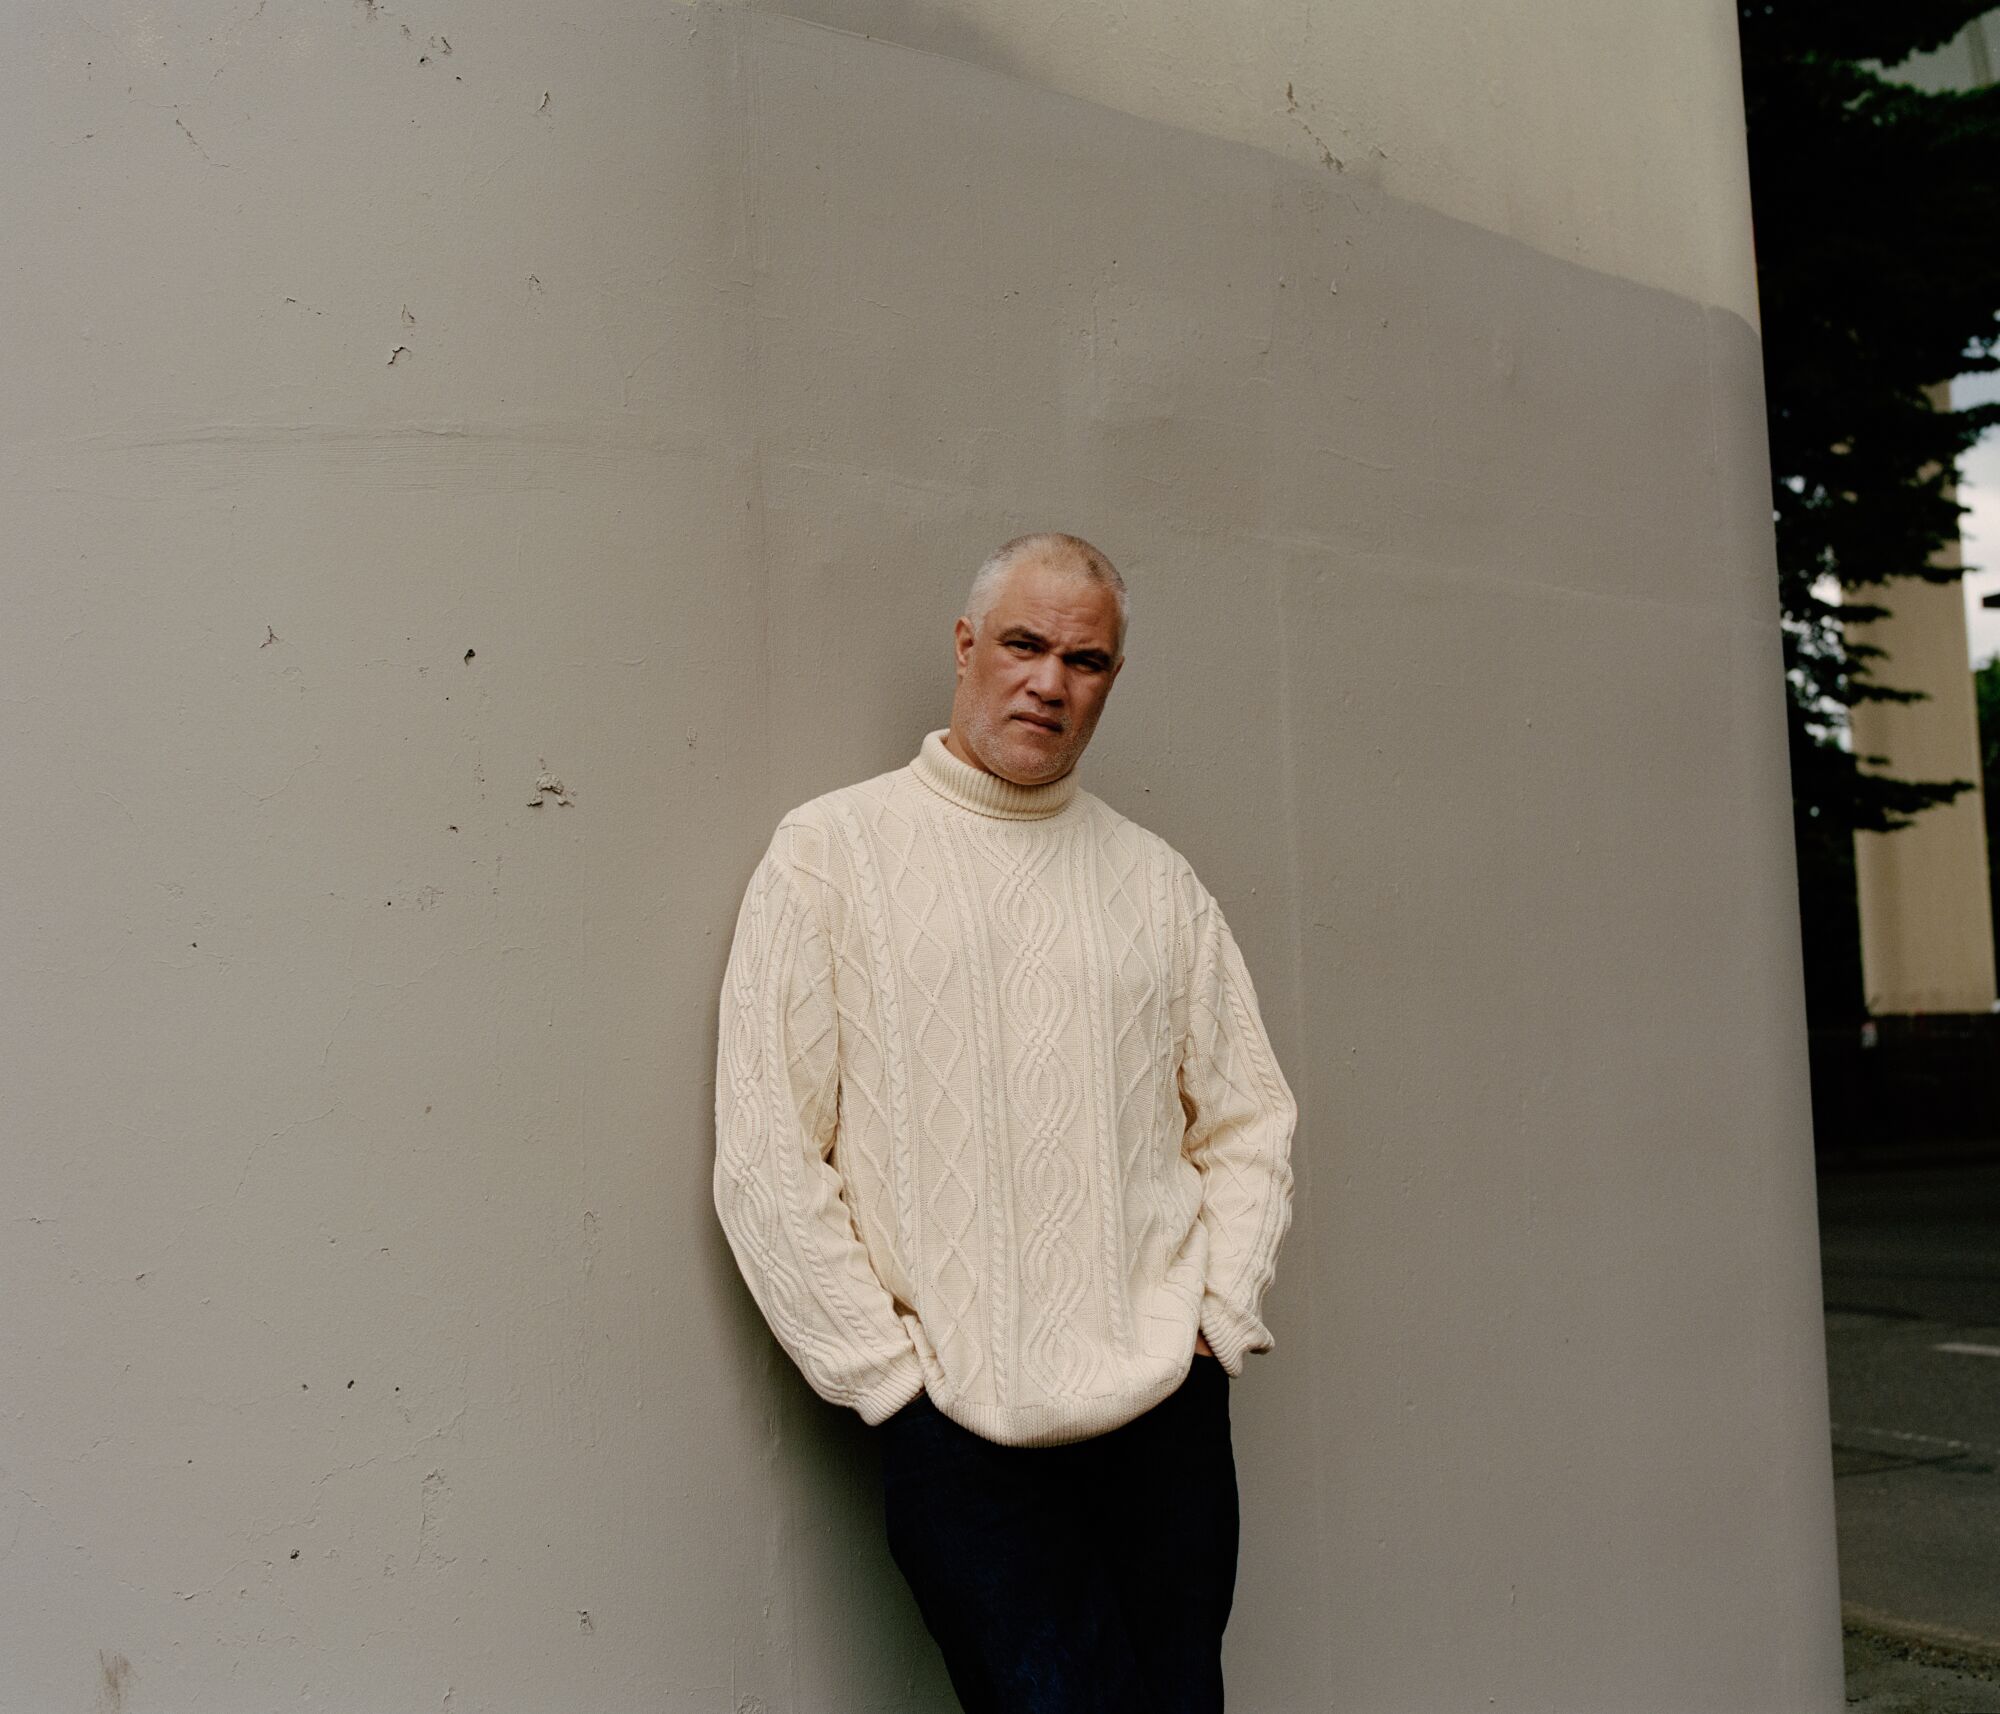 A portrait of Mat Johnson wearing a ribbed, white sweater.